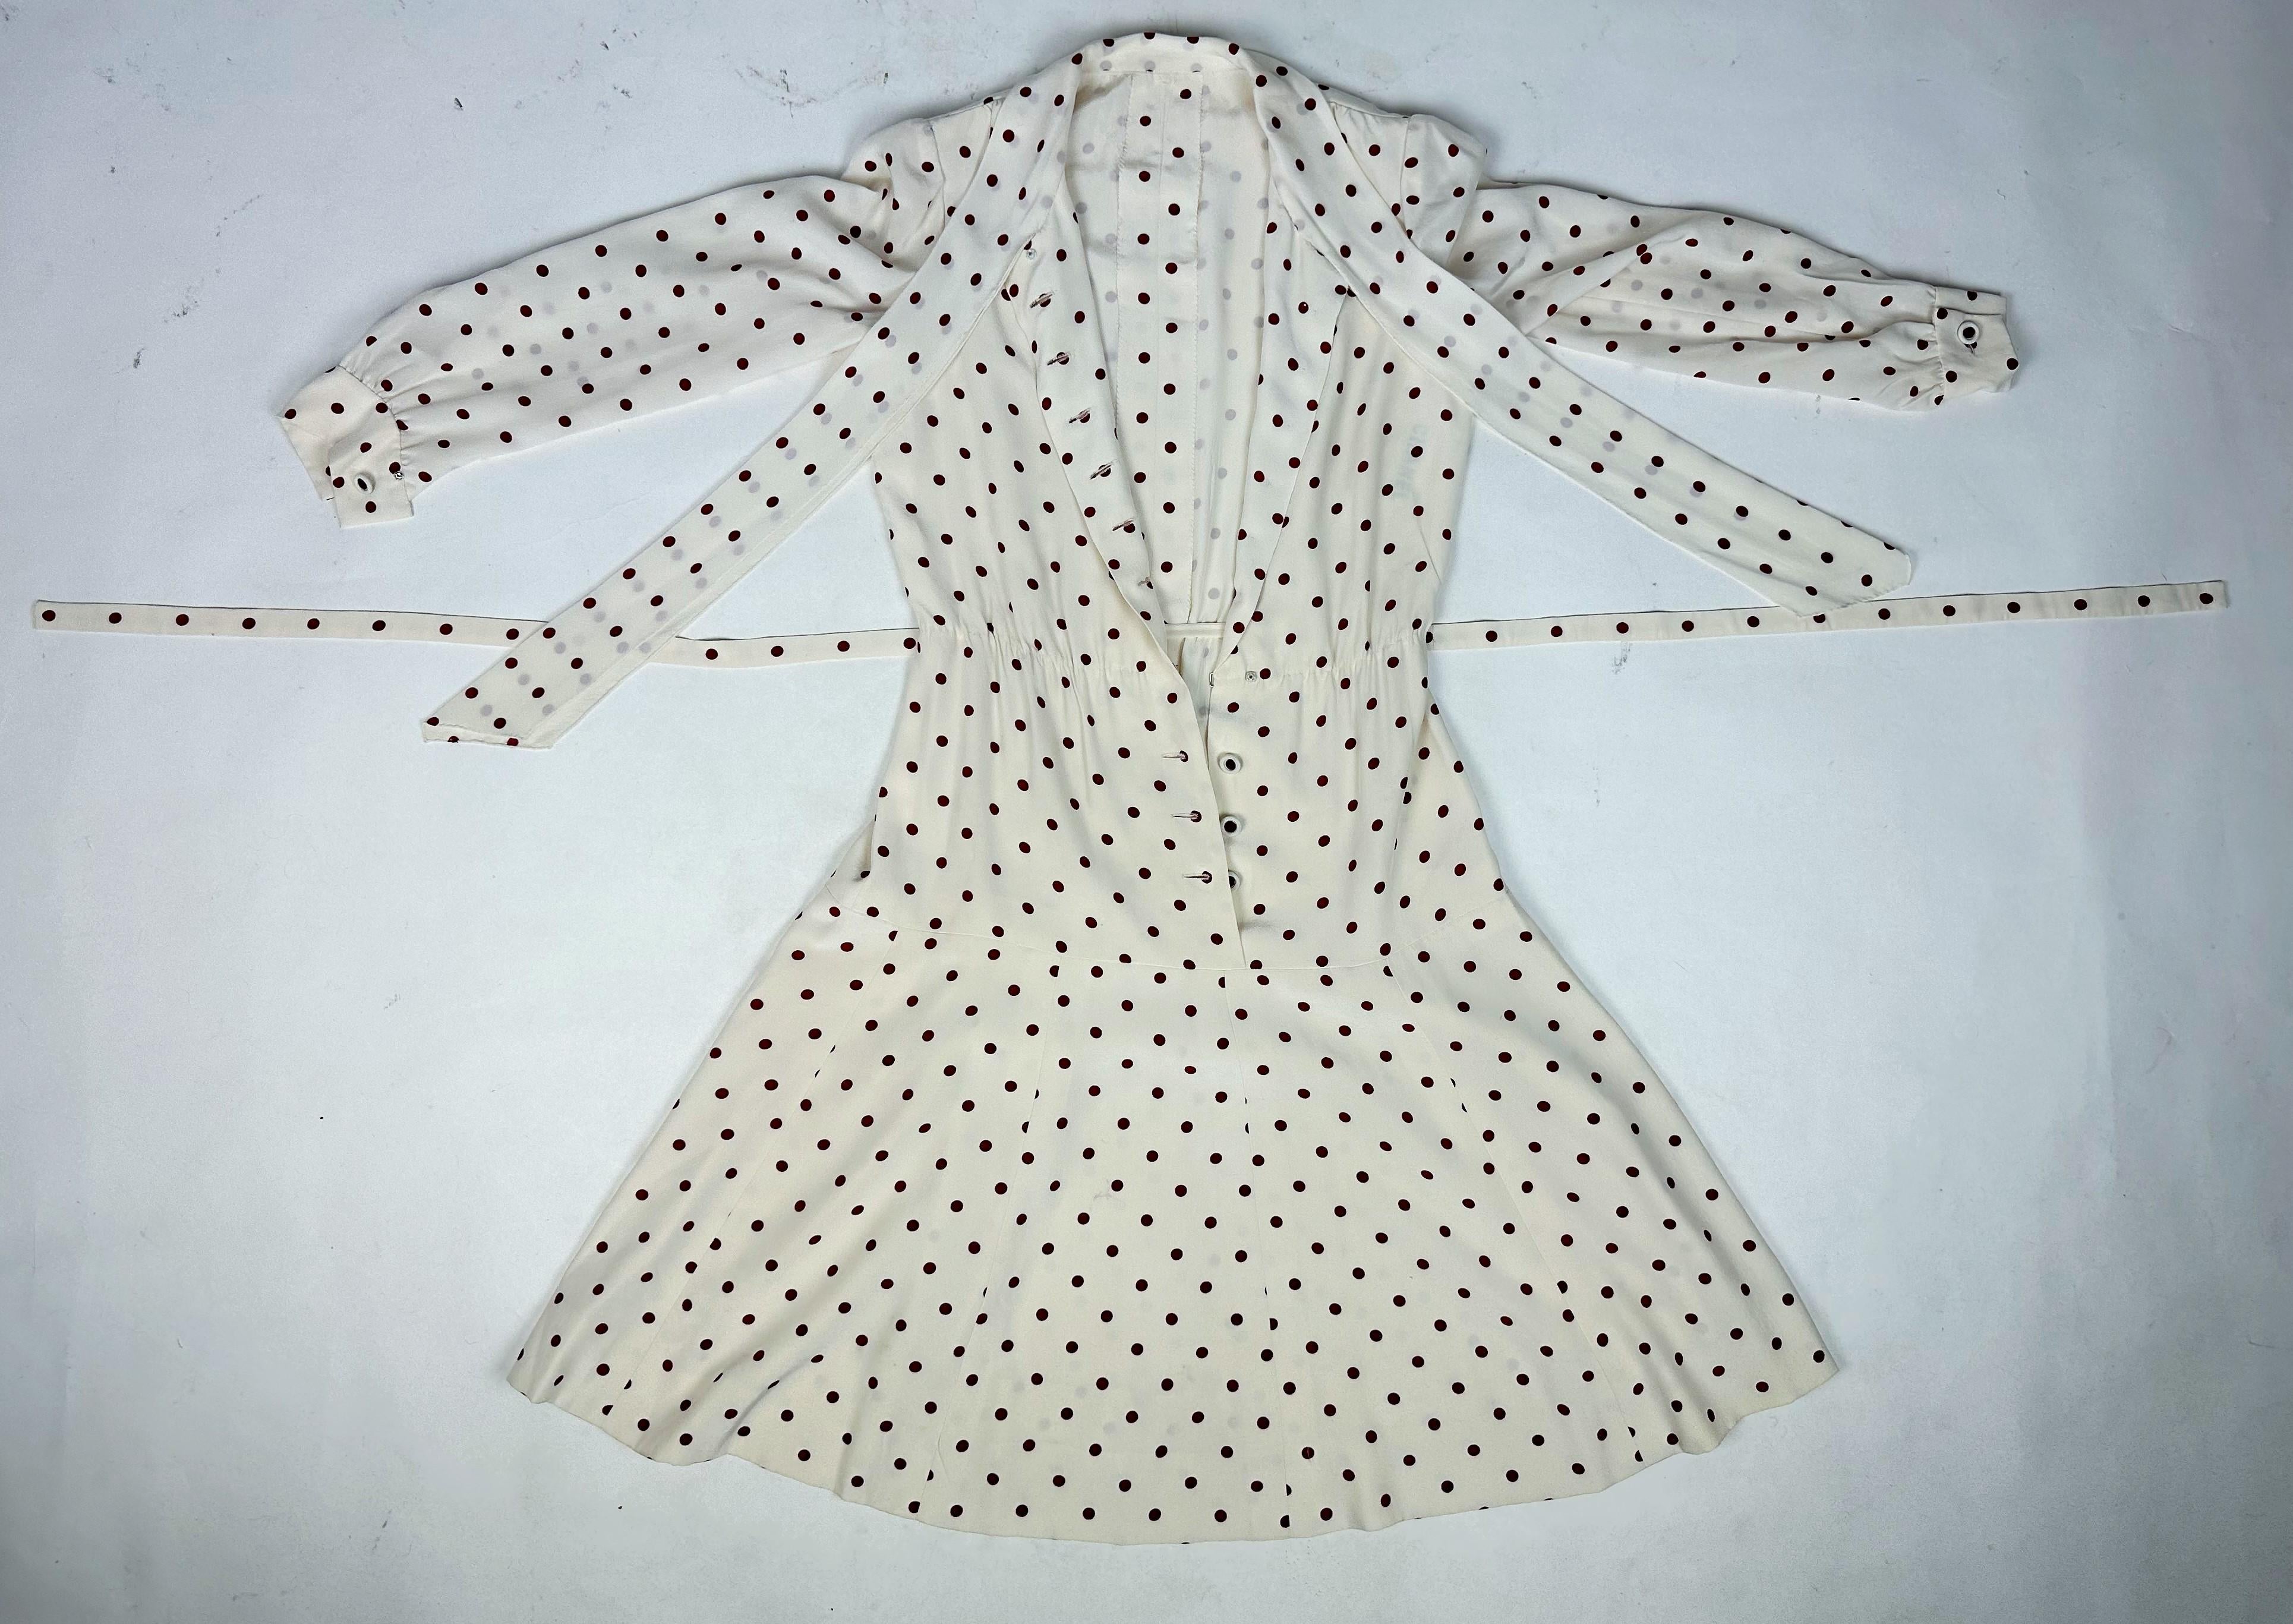 A Polka Dots crepe cocktail dress by Chanel Haute Couture numbered 59644 C. 1975 For Sale 12